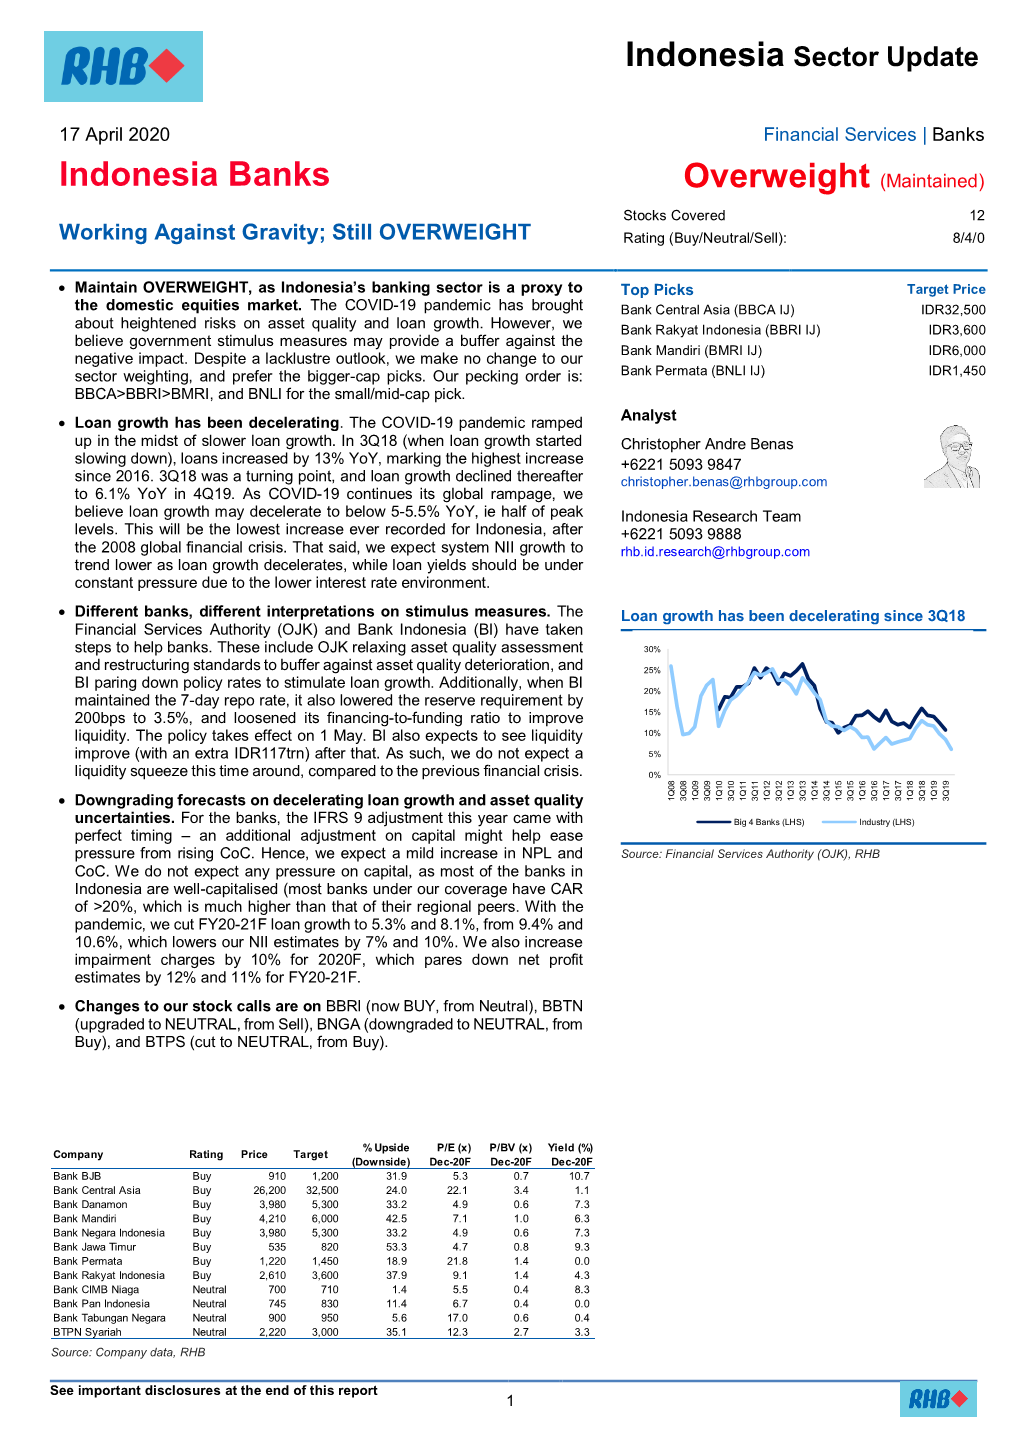 Bank Central Asia (BBCA IJ) IDR32,500 About Heightened Risks on Asset Quality and Loan Growth